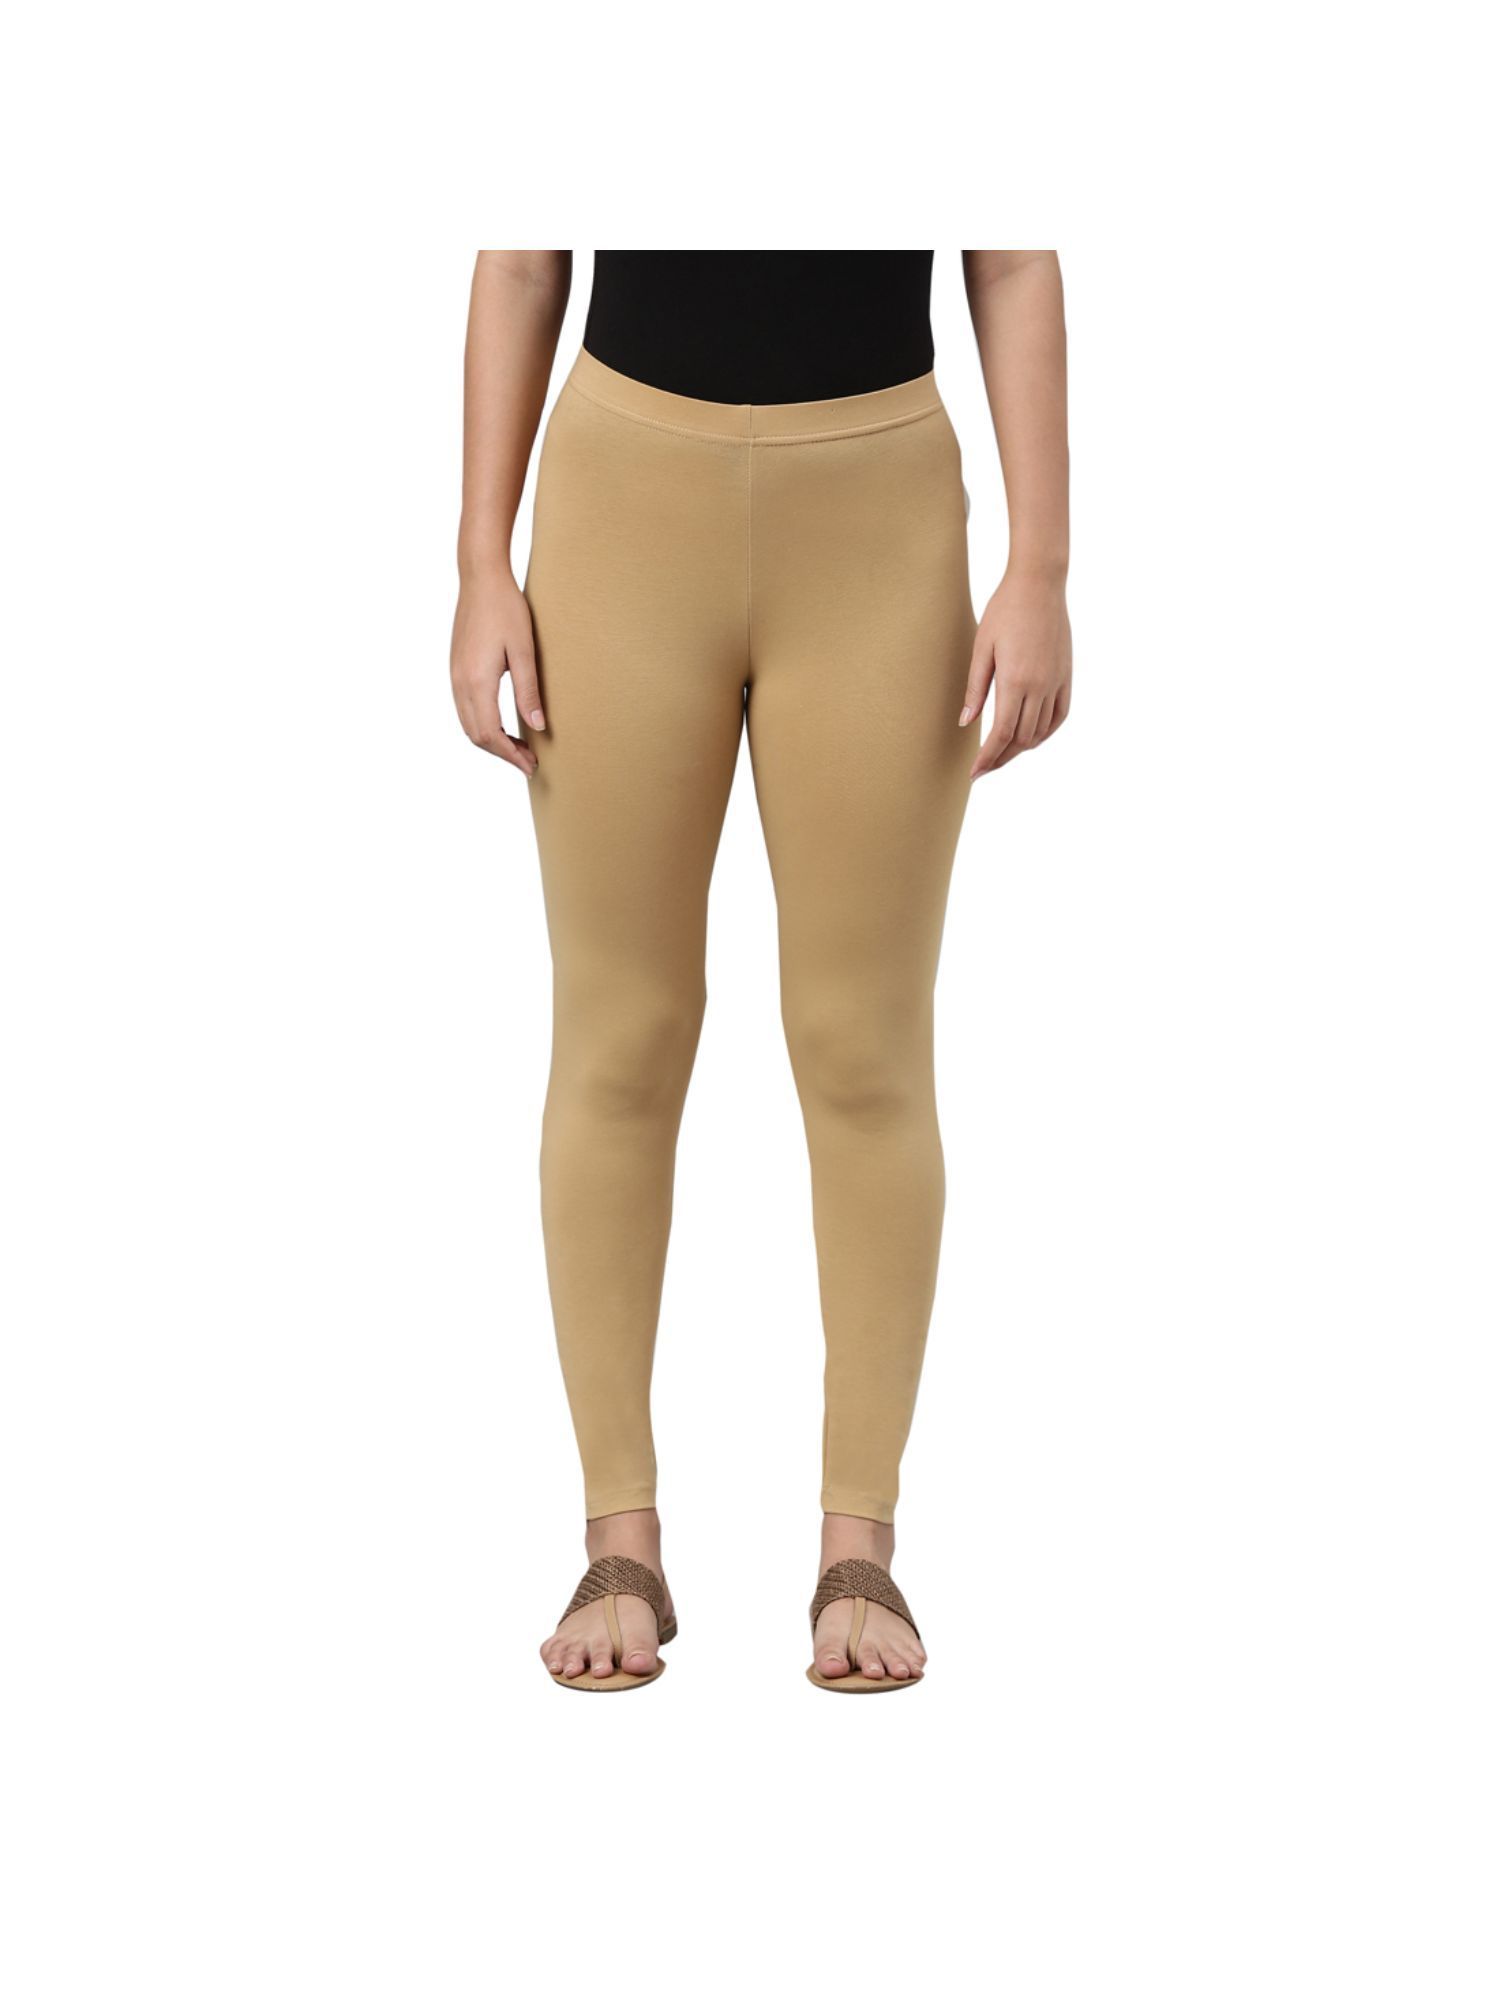 GO COLORS Womens Tapered Fit Cotton Cotton Pants (Wheat_M) Beige